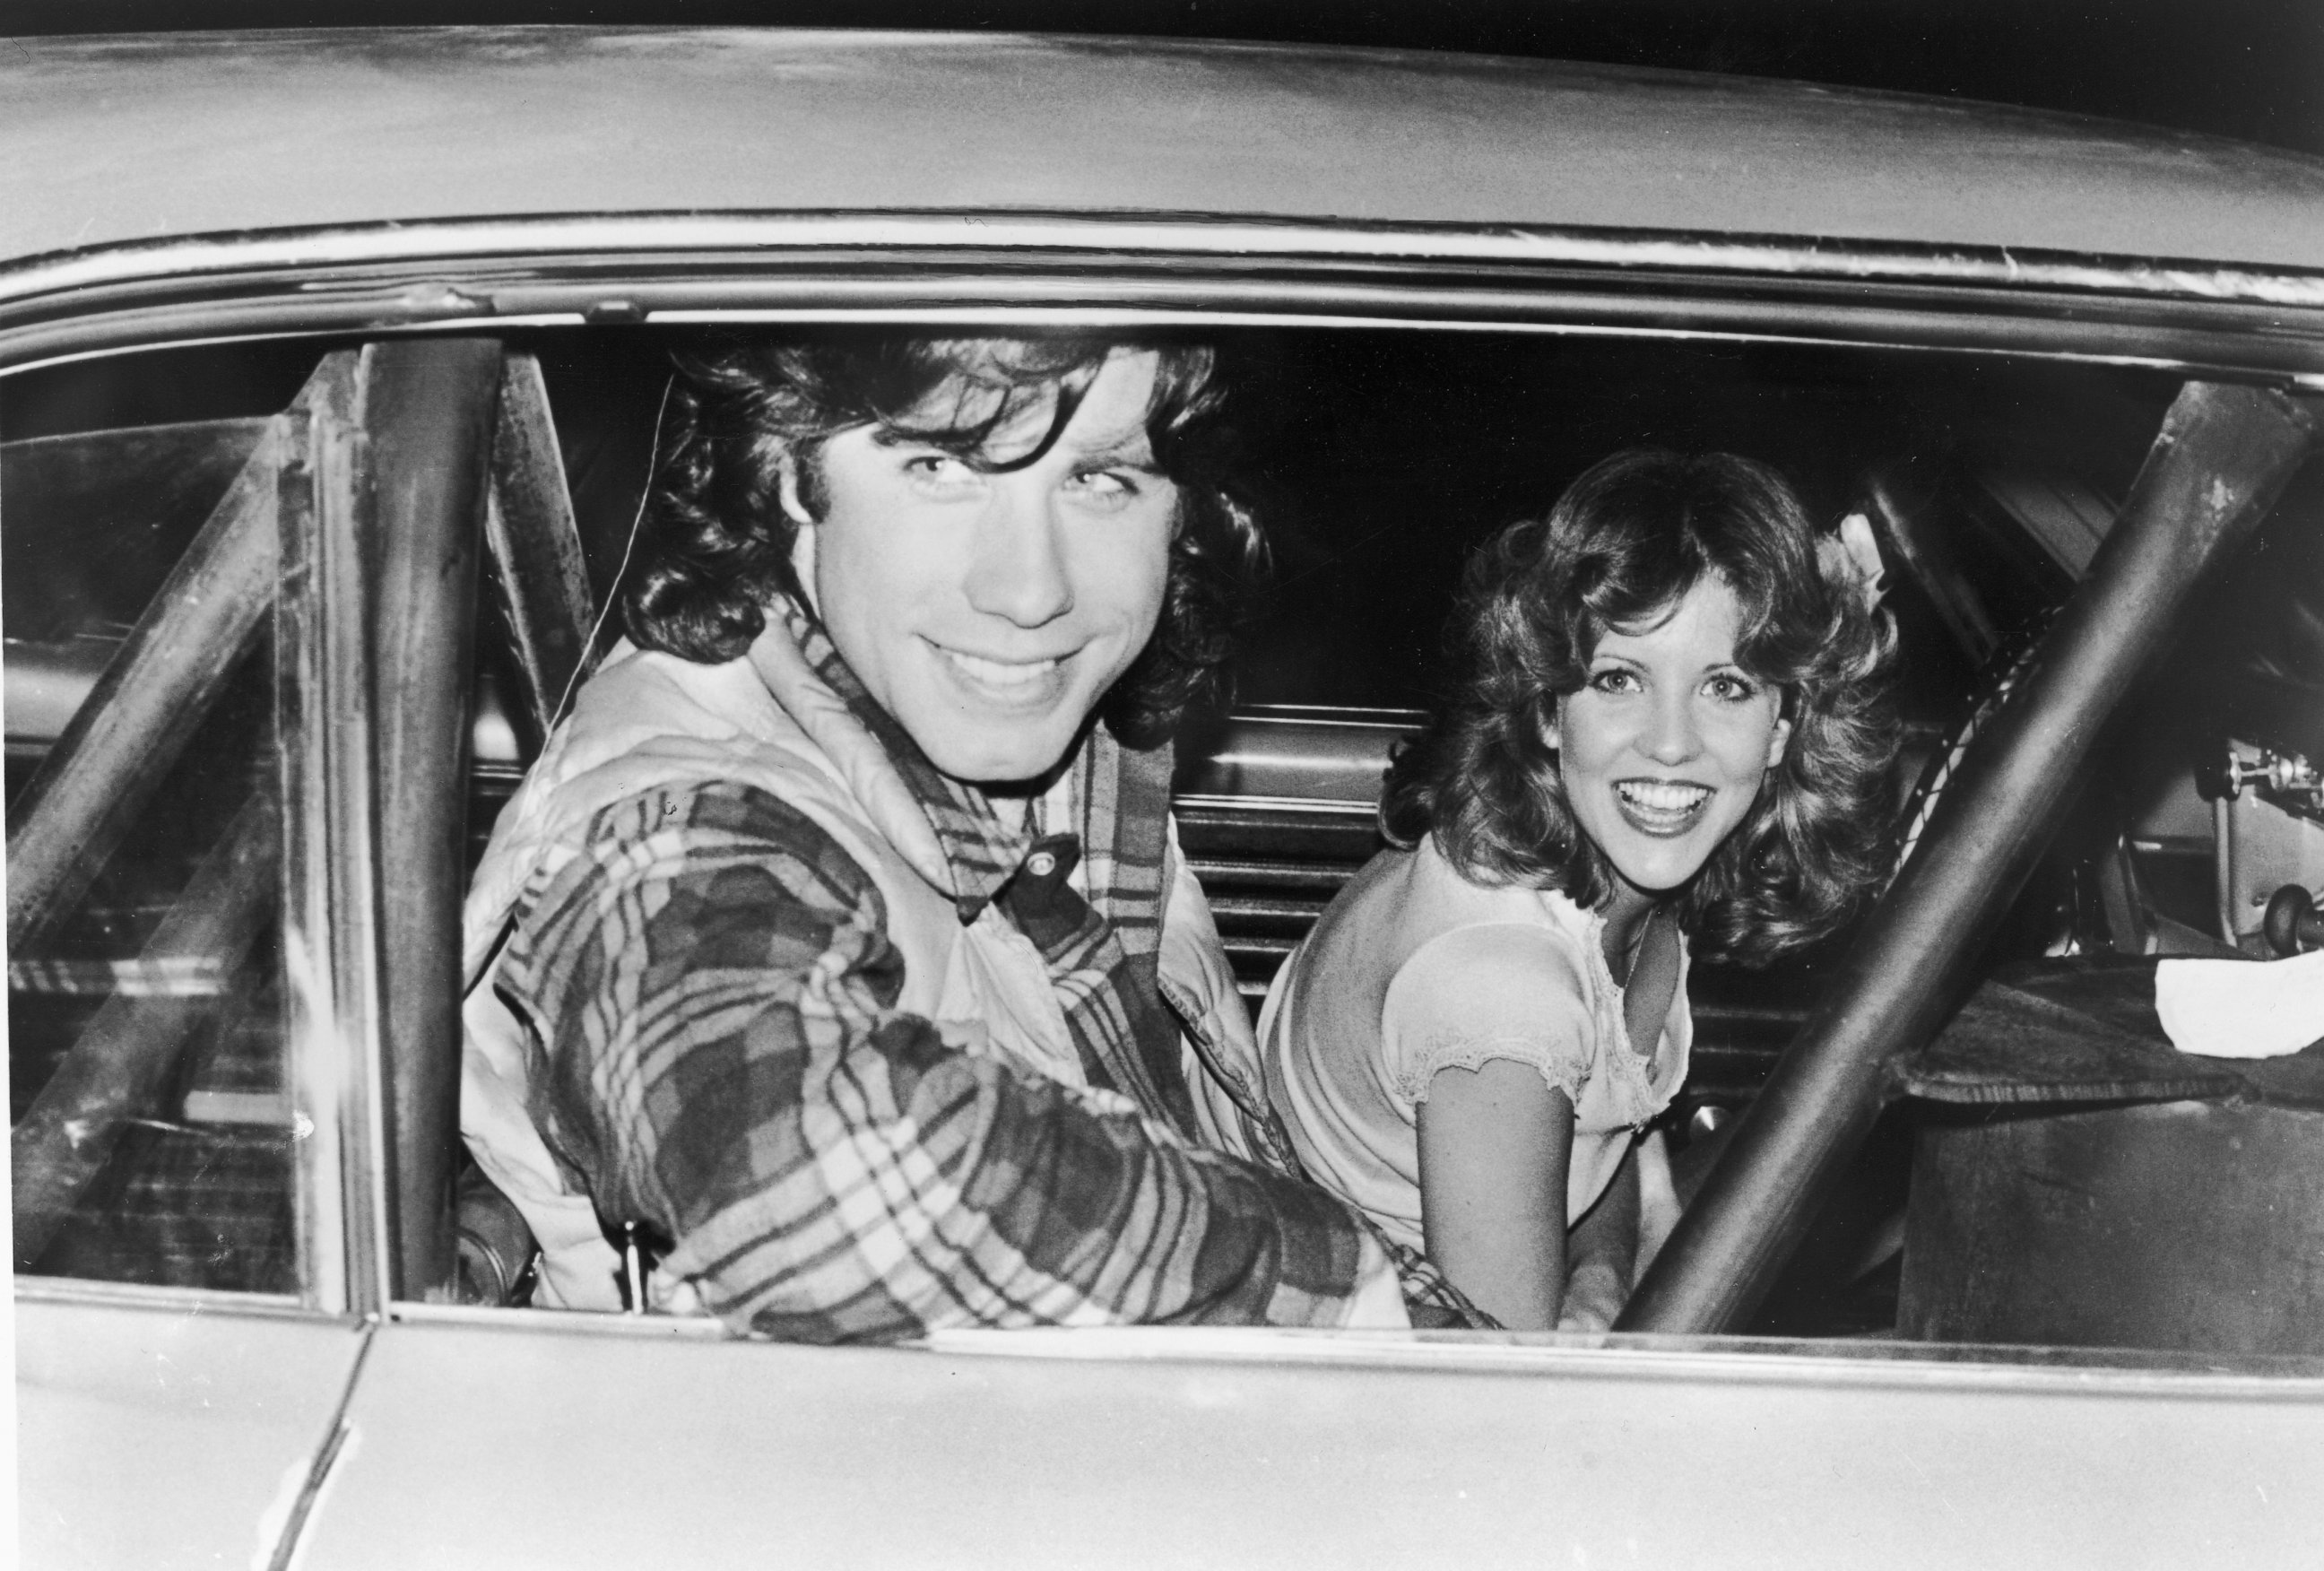 PHOTO: John Travolta and Nancy Allen pose in a car on the set of the film "Carrie," directed by Brian De Palma, 1976.